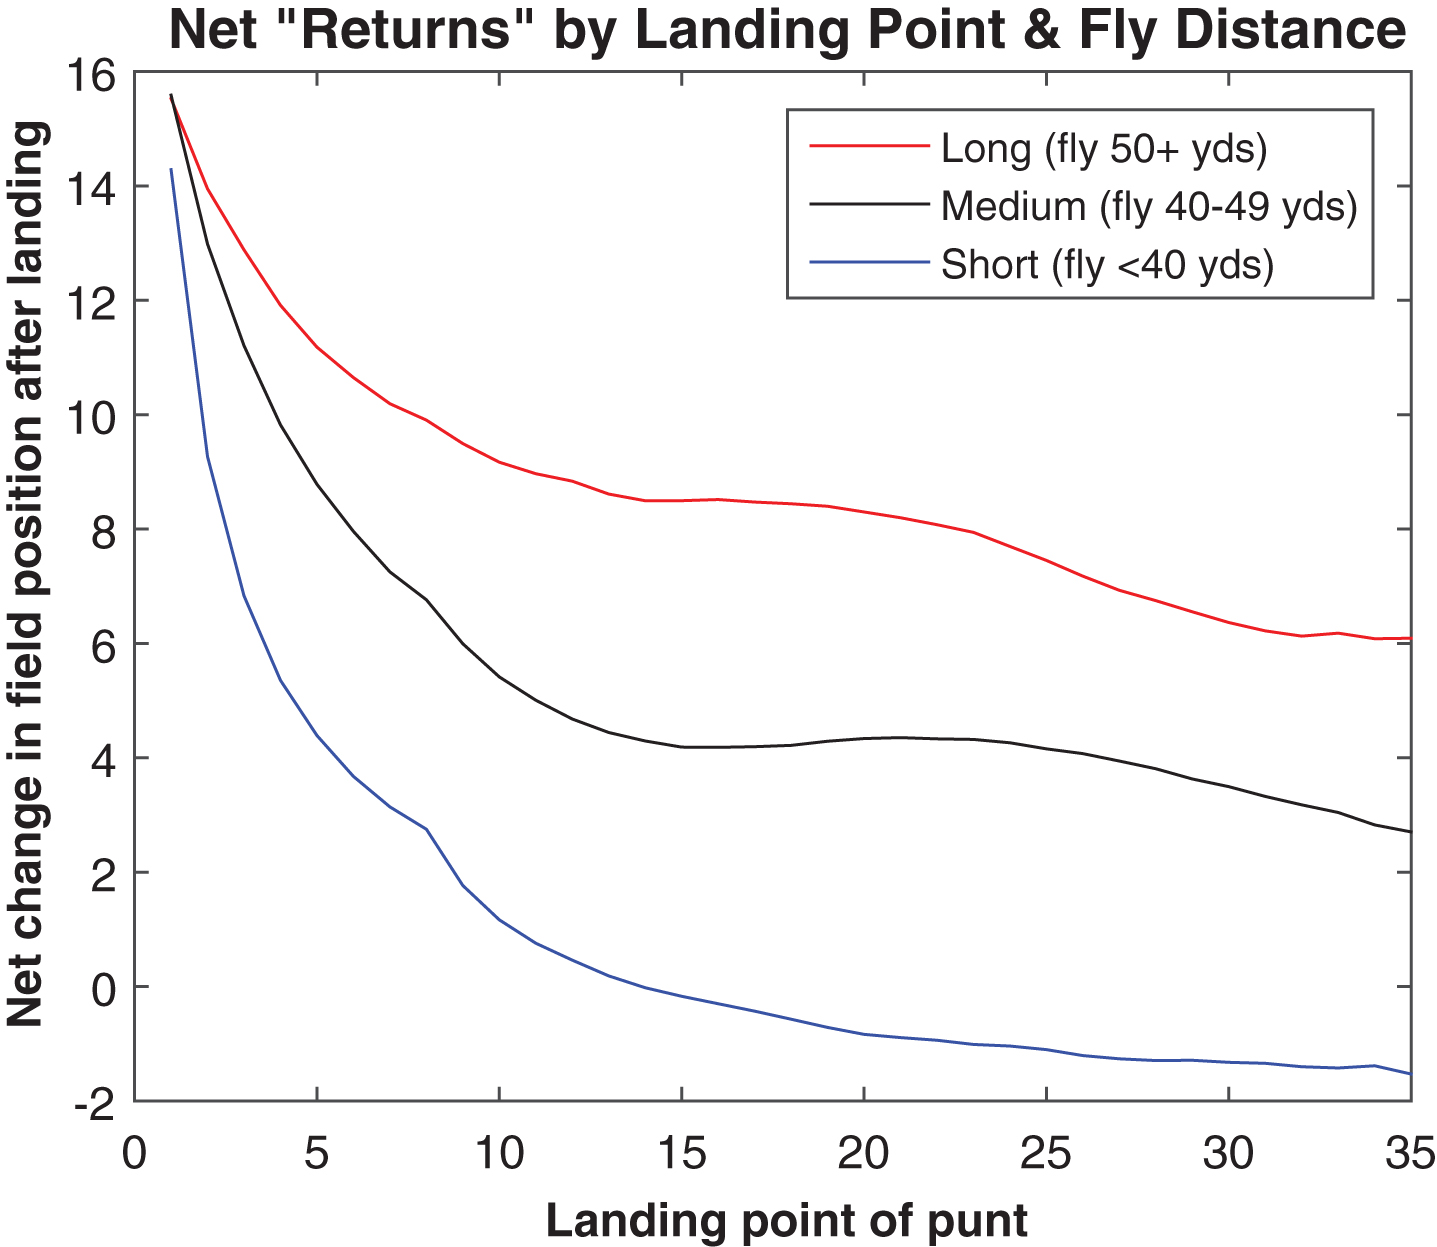 Average post-bounce “returns” by landing point and fly distance, 2013.